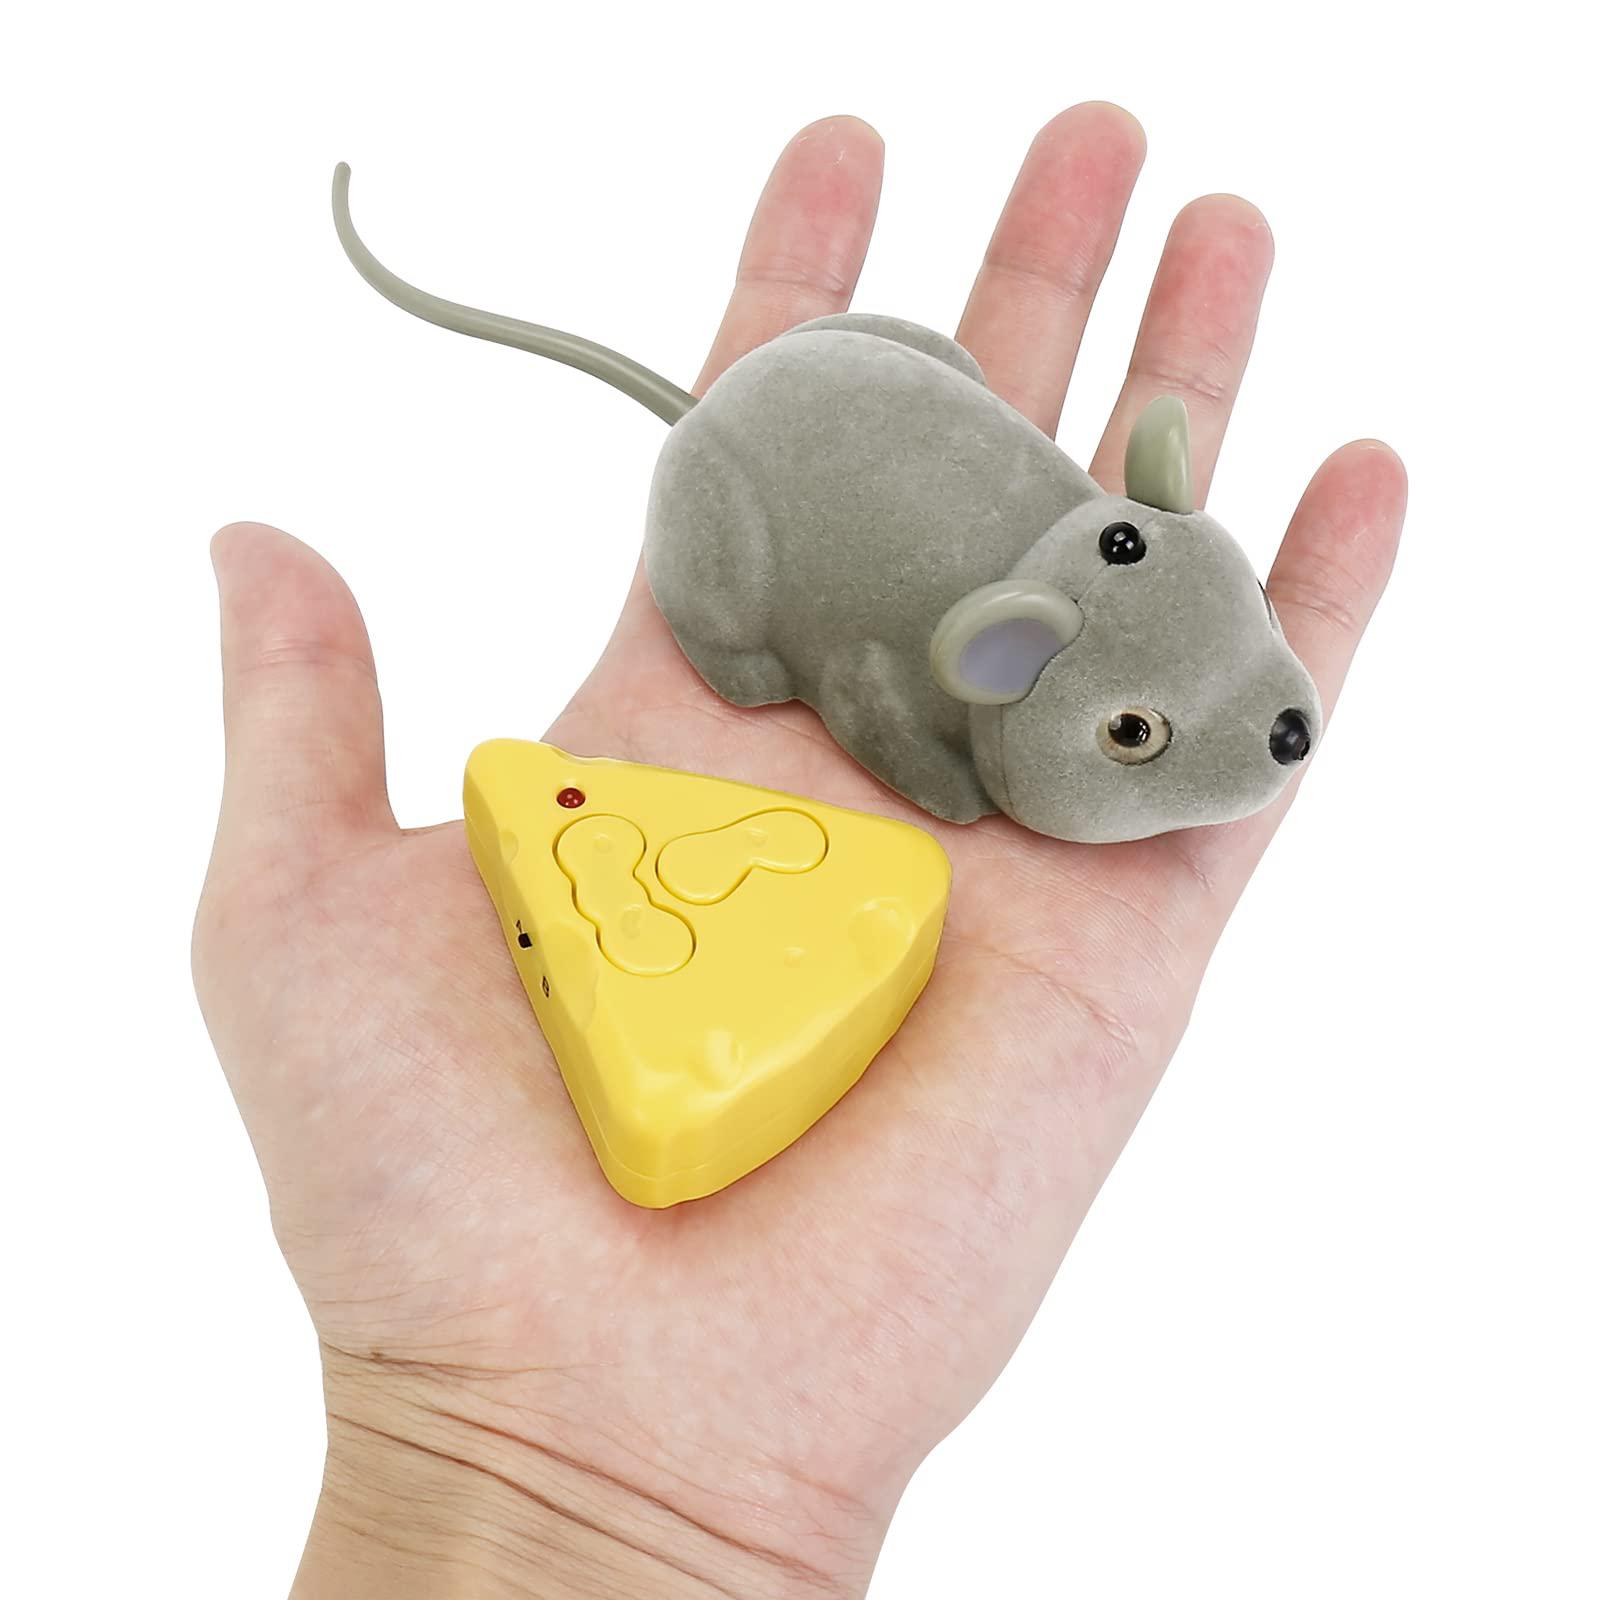 lylyzoo interactive cat mouse toy?rechargeable electric moving cat toy with cheese remote control for indoor cats kitten fun 